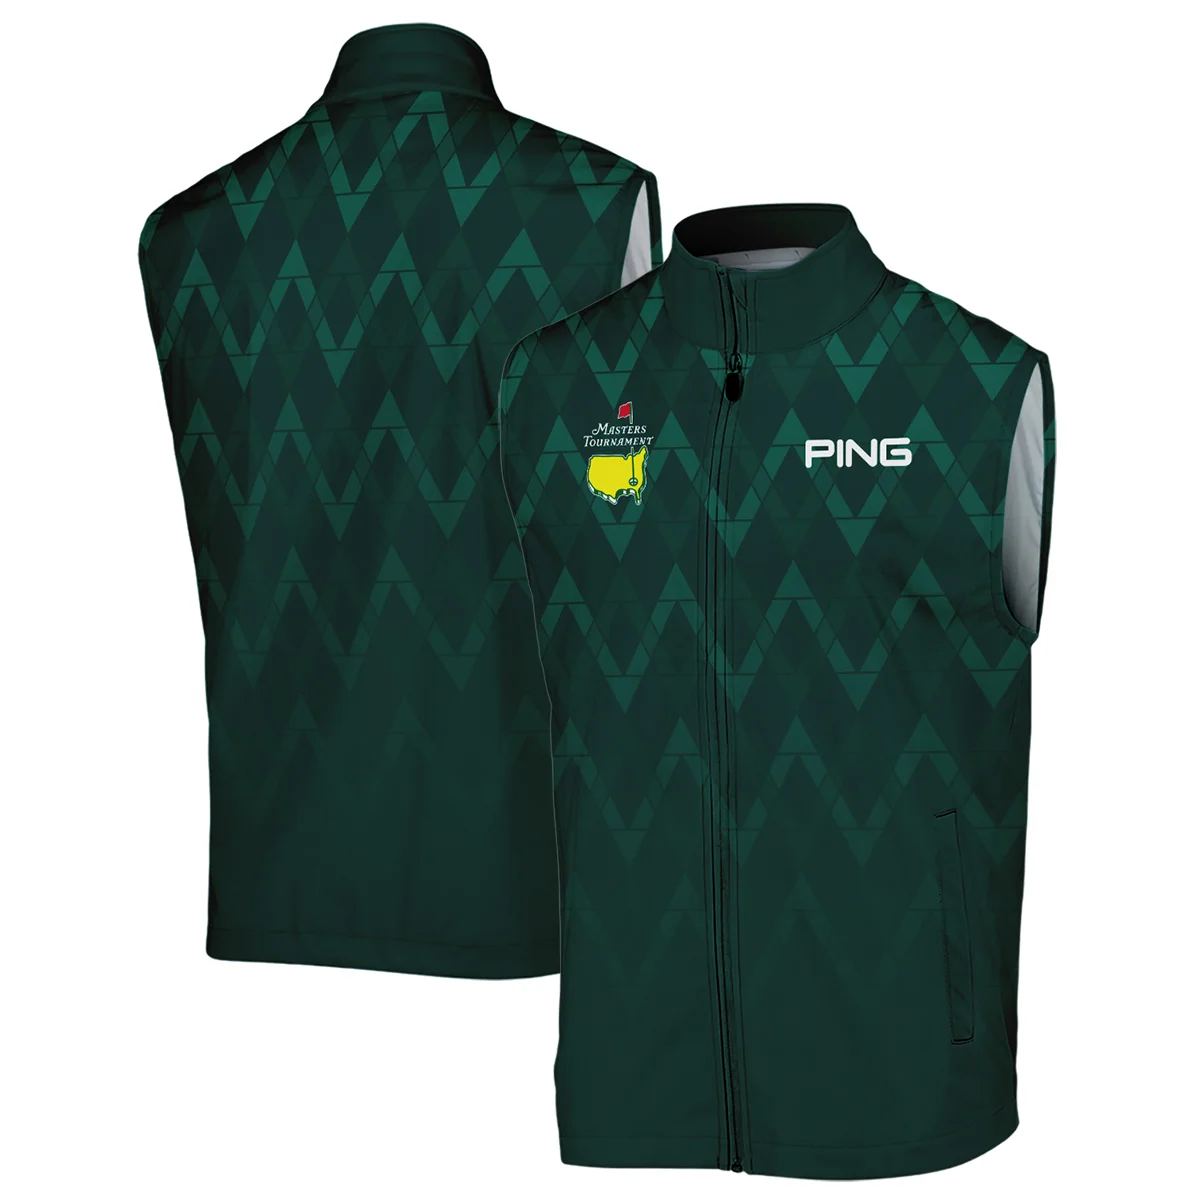 Abstract Dark Green Zigzag Background Masters Tournament Ping Vneck Polo Shirt Style Classic Polo Shirt For Men